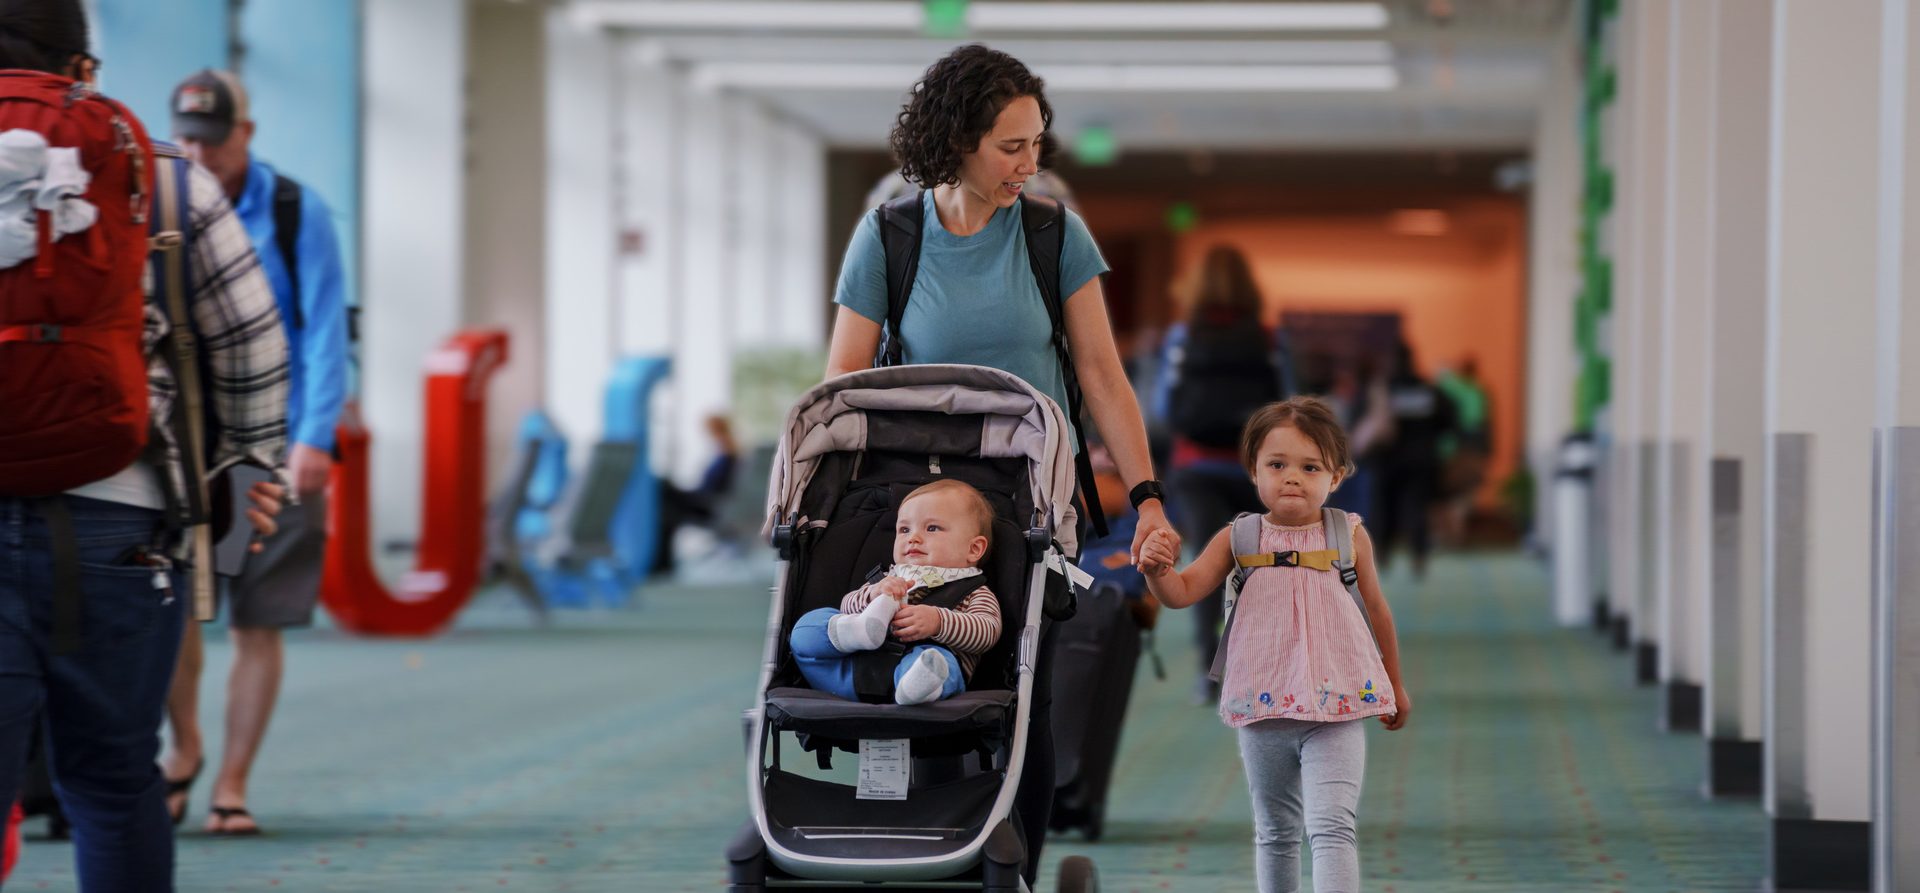 Flying With Baby: Does a Stroller Count As a Carry On